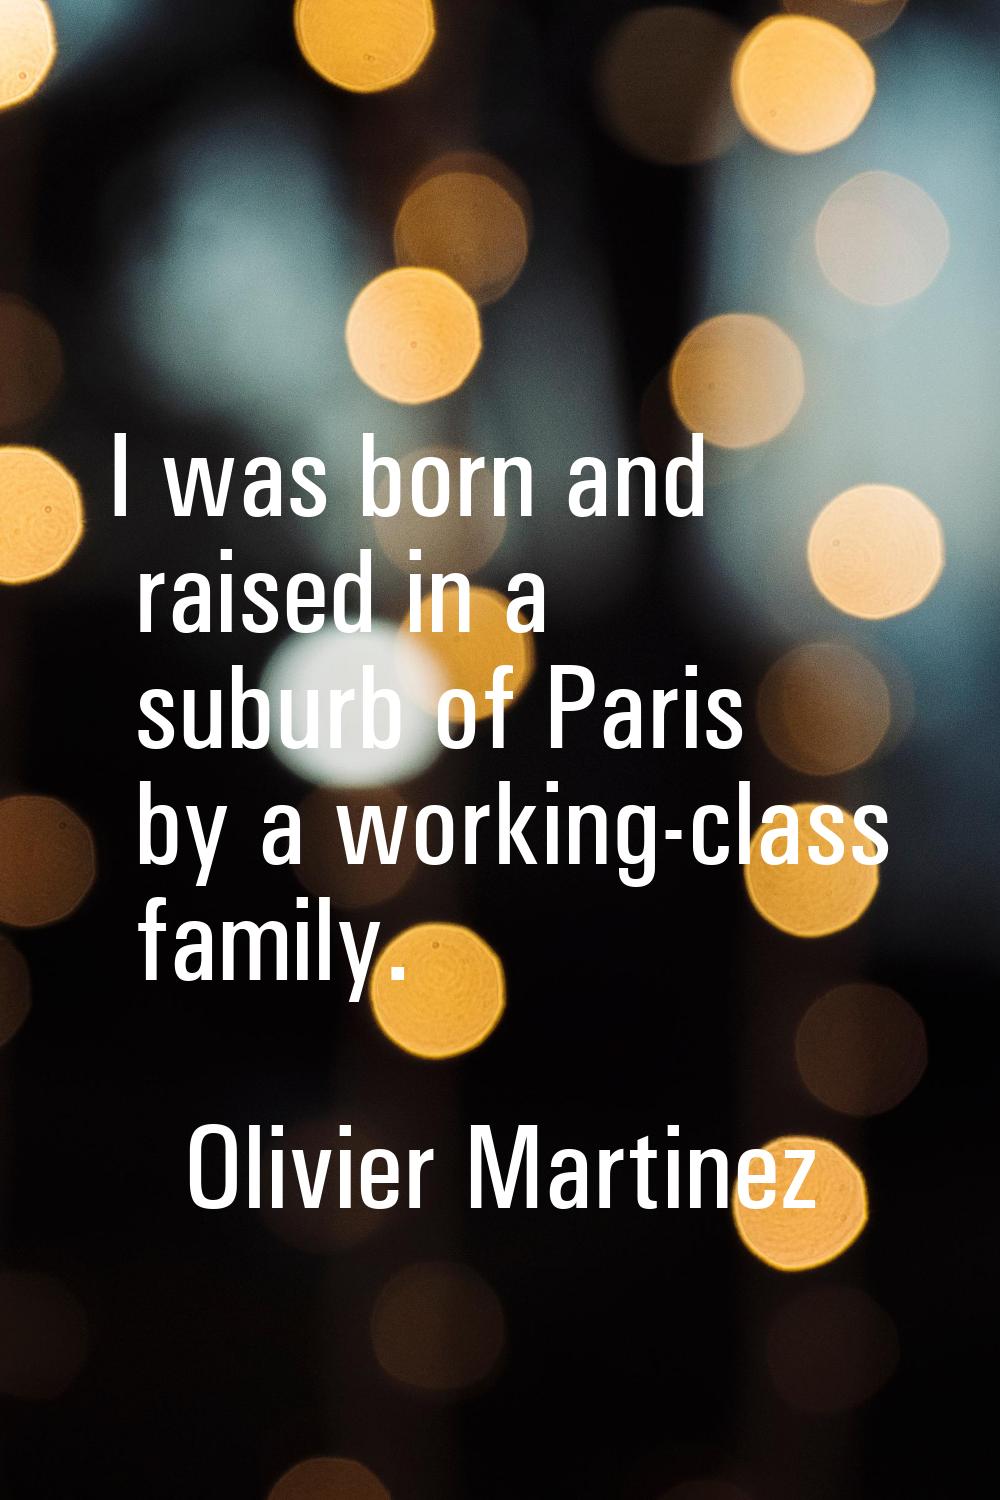 I was born and raised in a suburb of Paris by a working-class family.